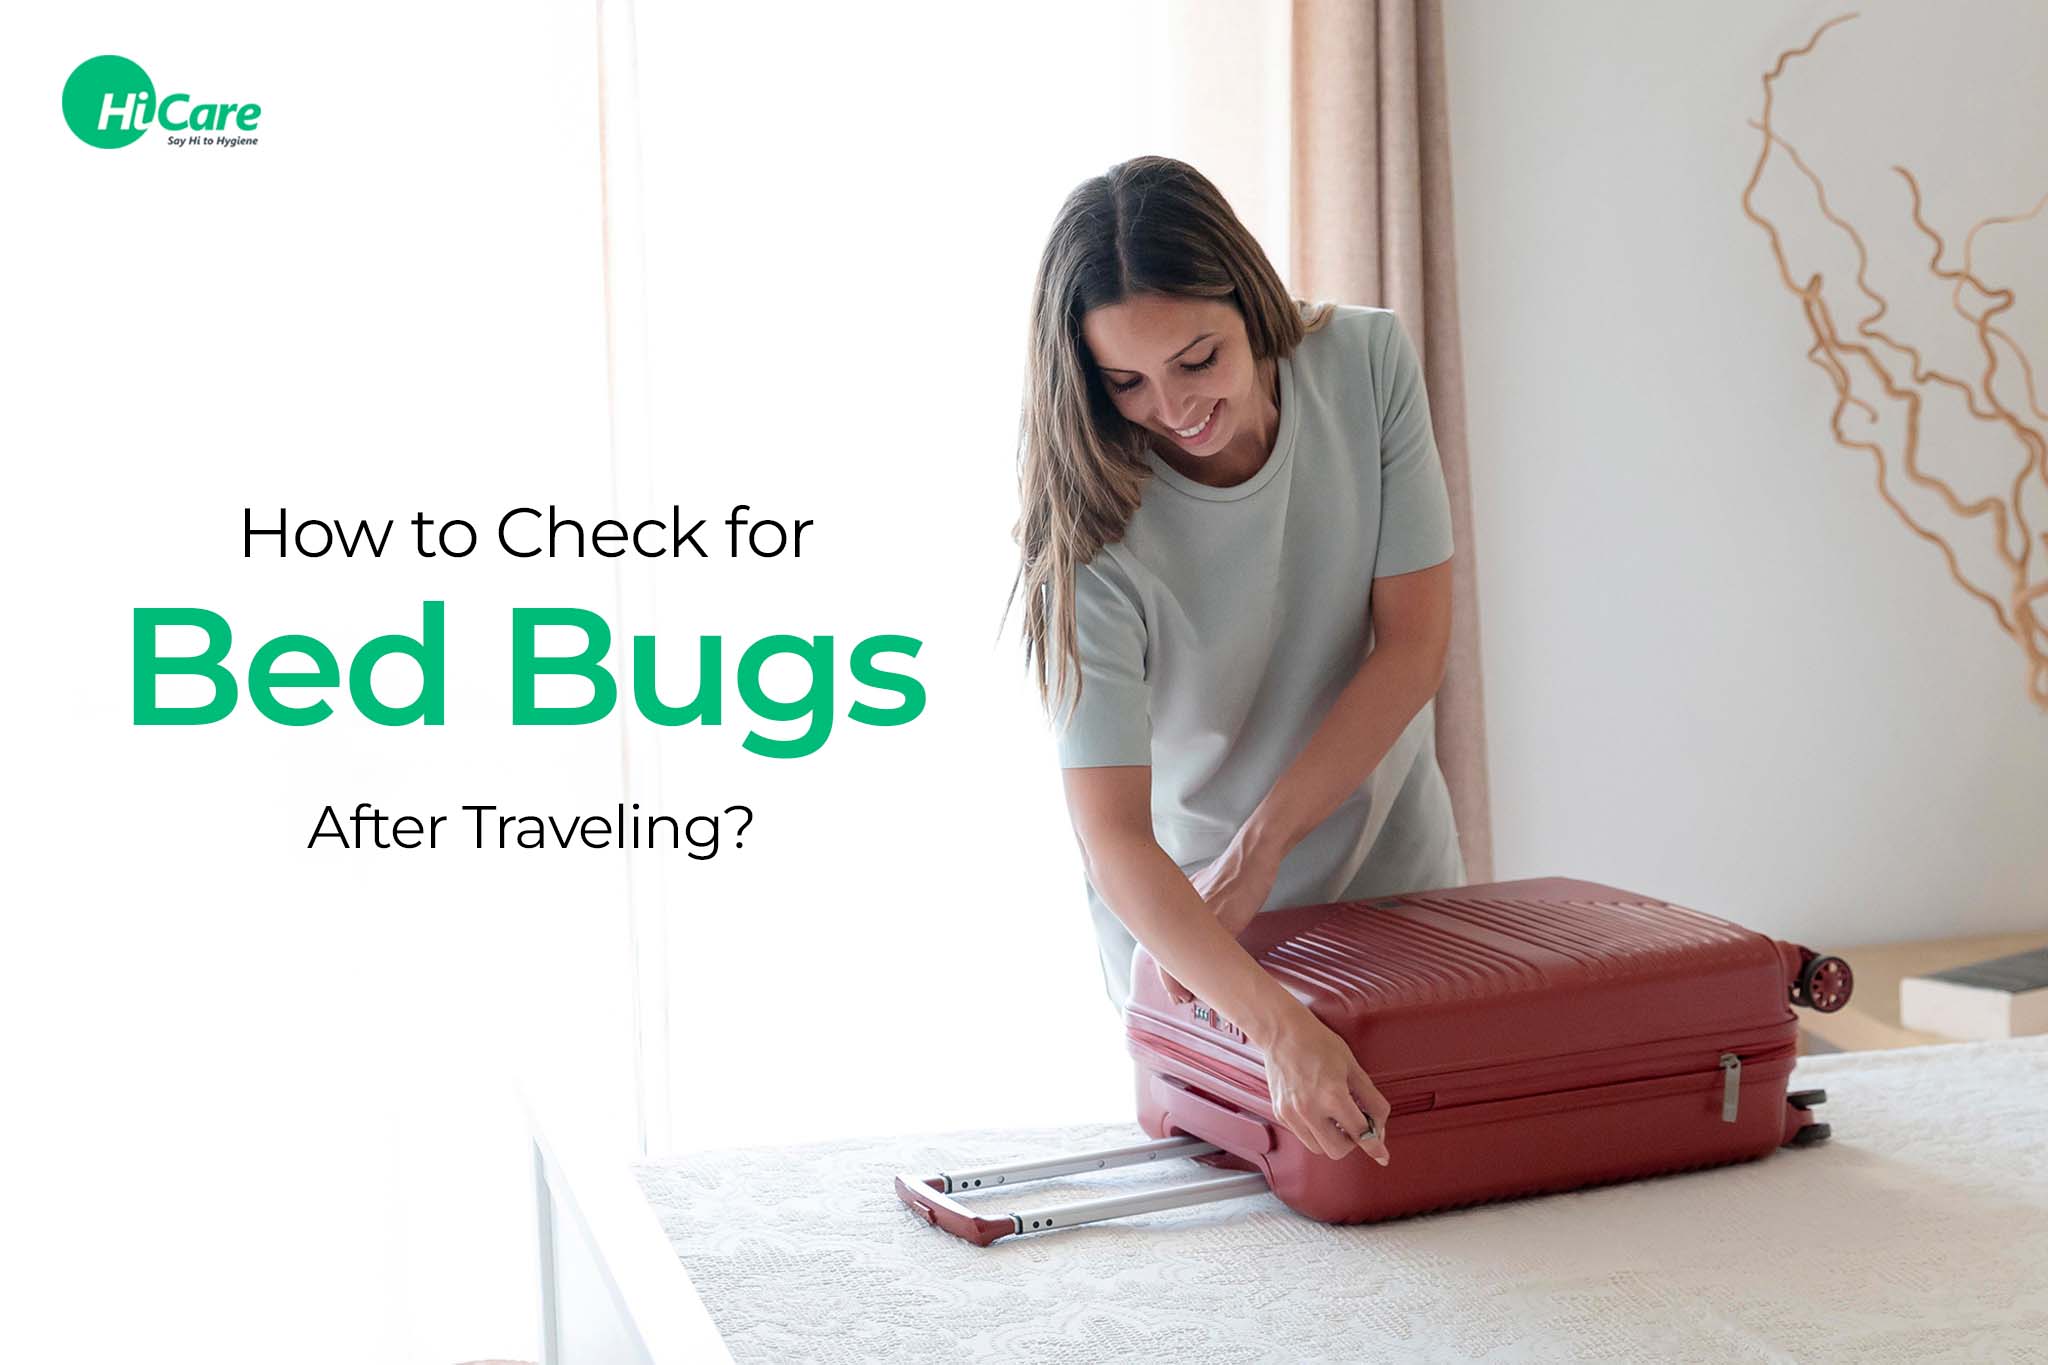 How to Check for Bed Bugs After Traveling?